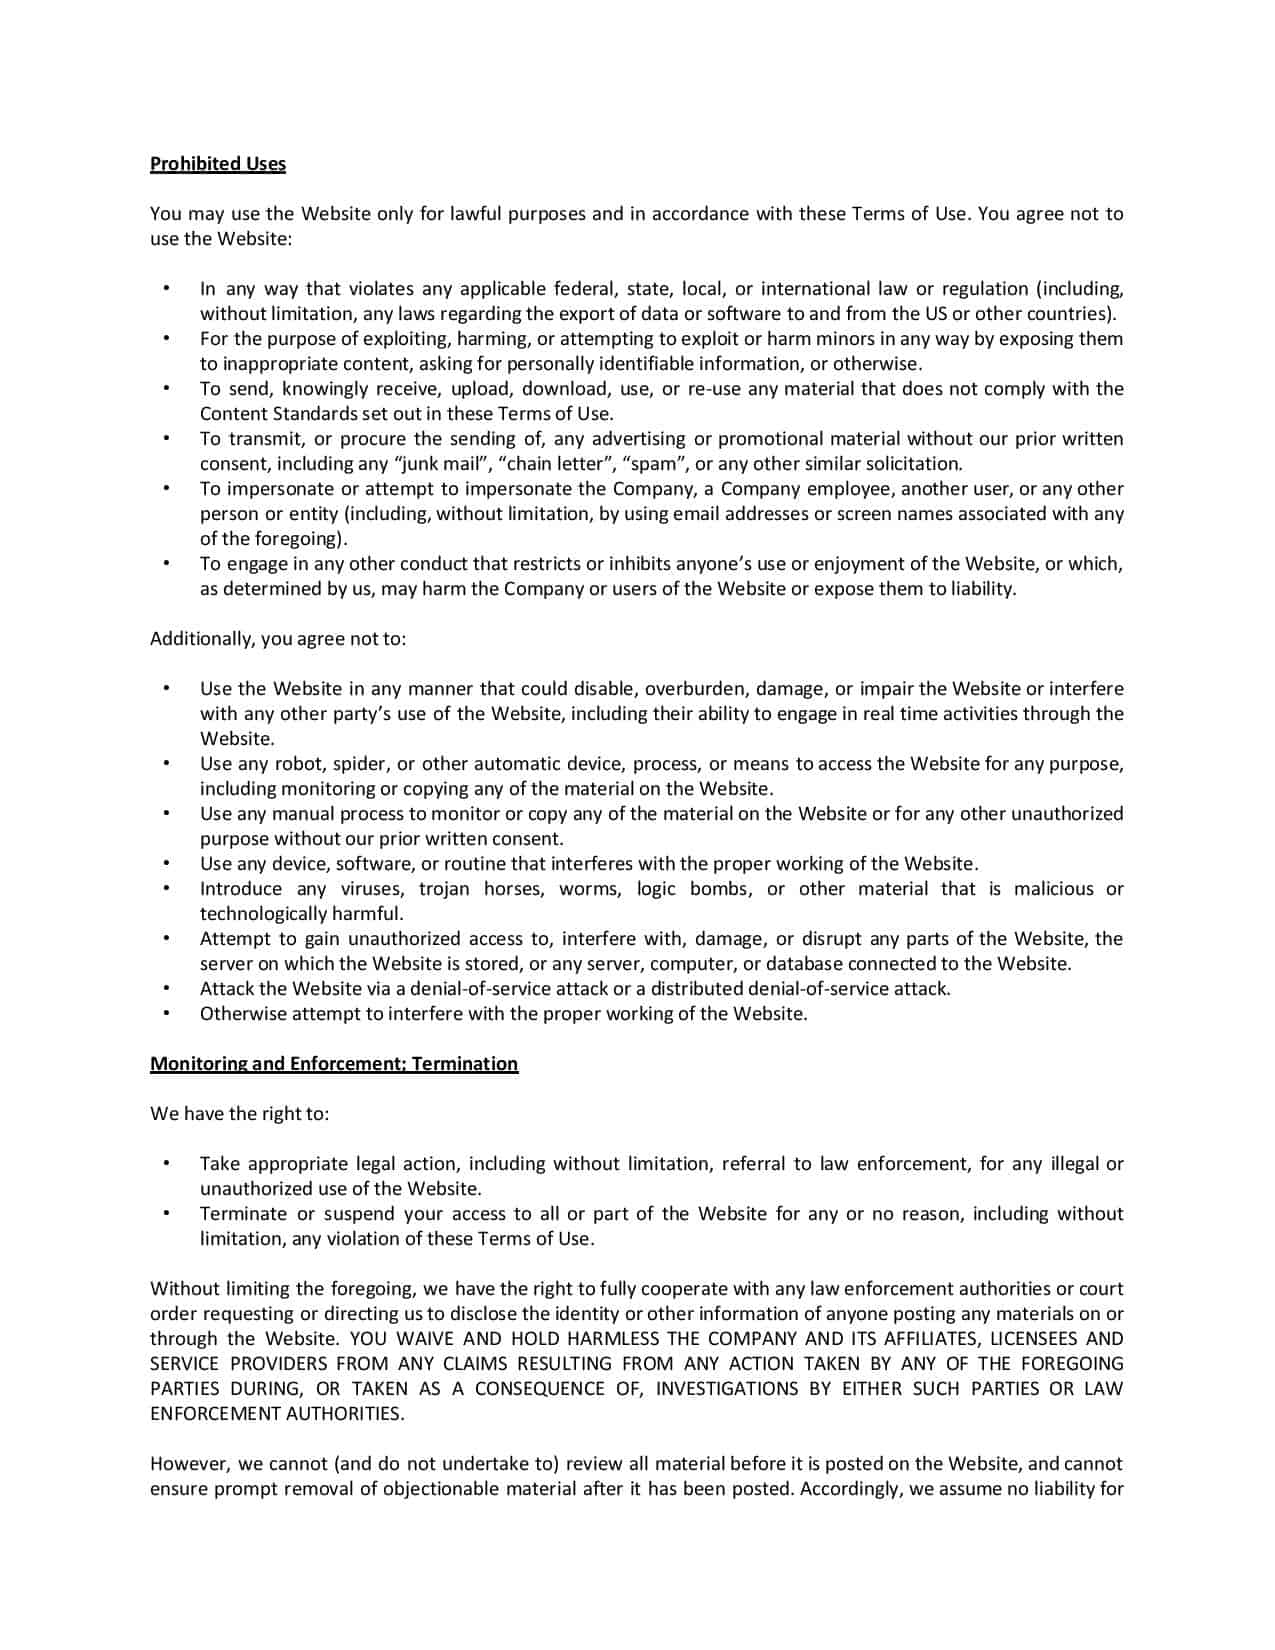 valleyhouserehabilitationcenter Terms of Use-page-003